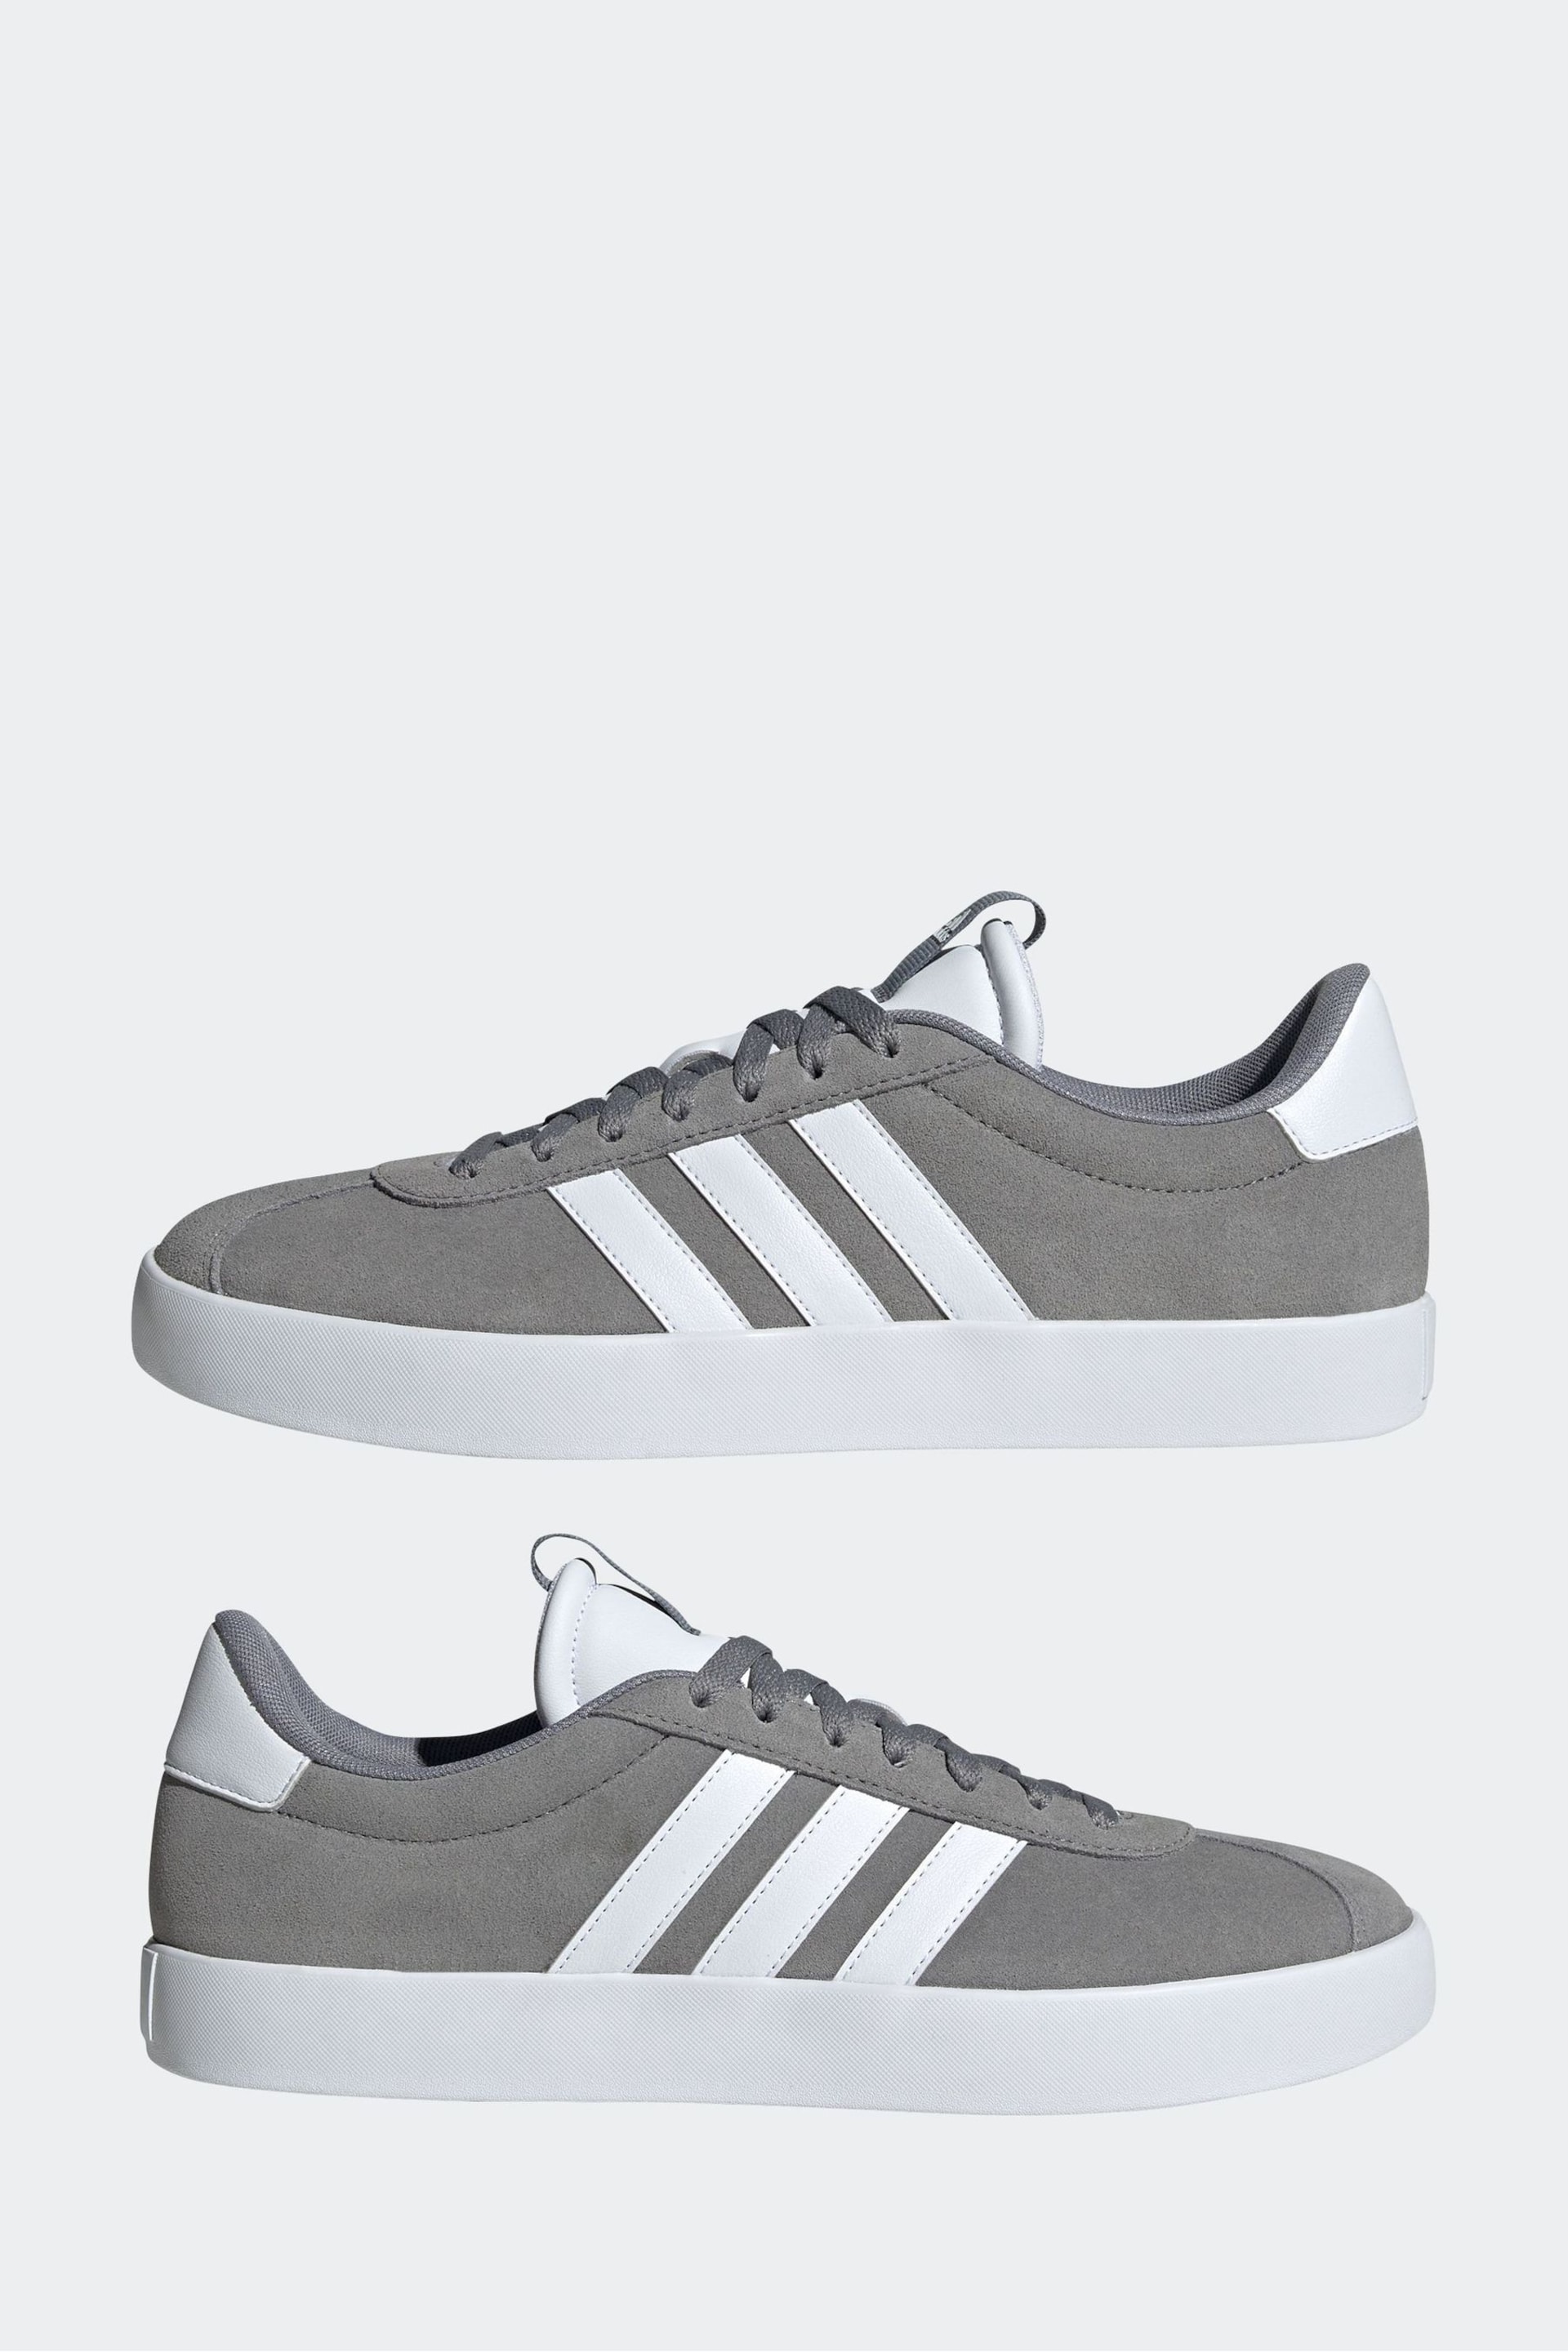 adidas Grey/White VL Court 3.0 Trainers - Image 5 of 11